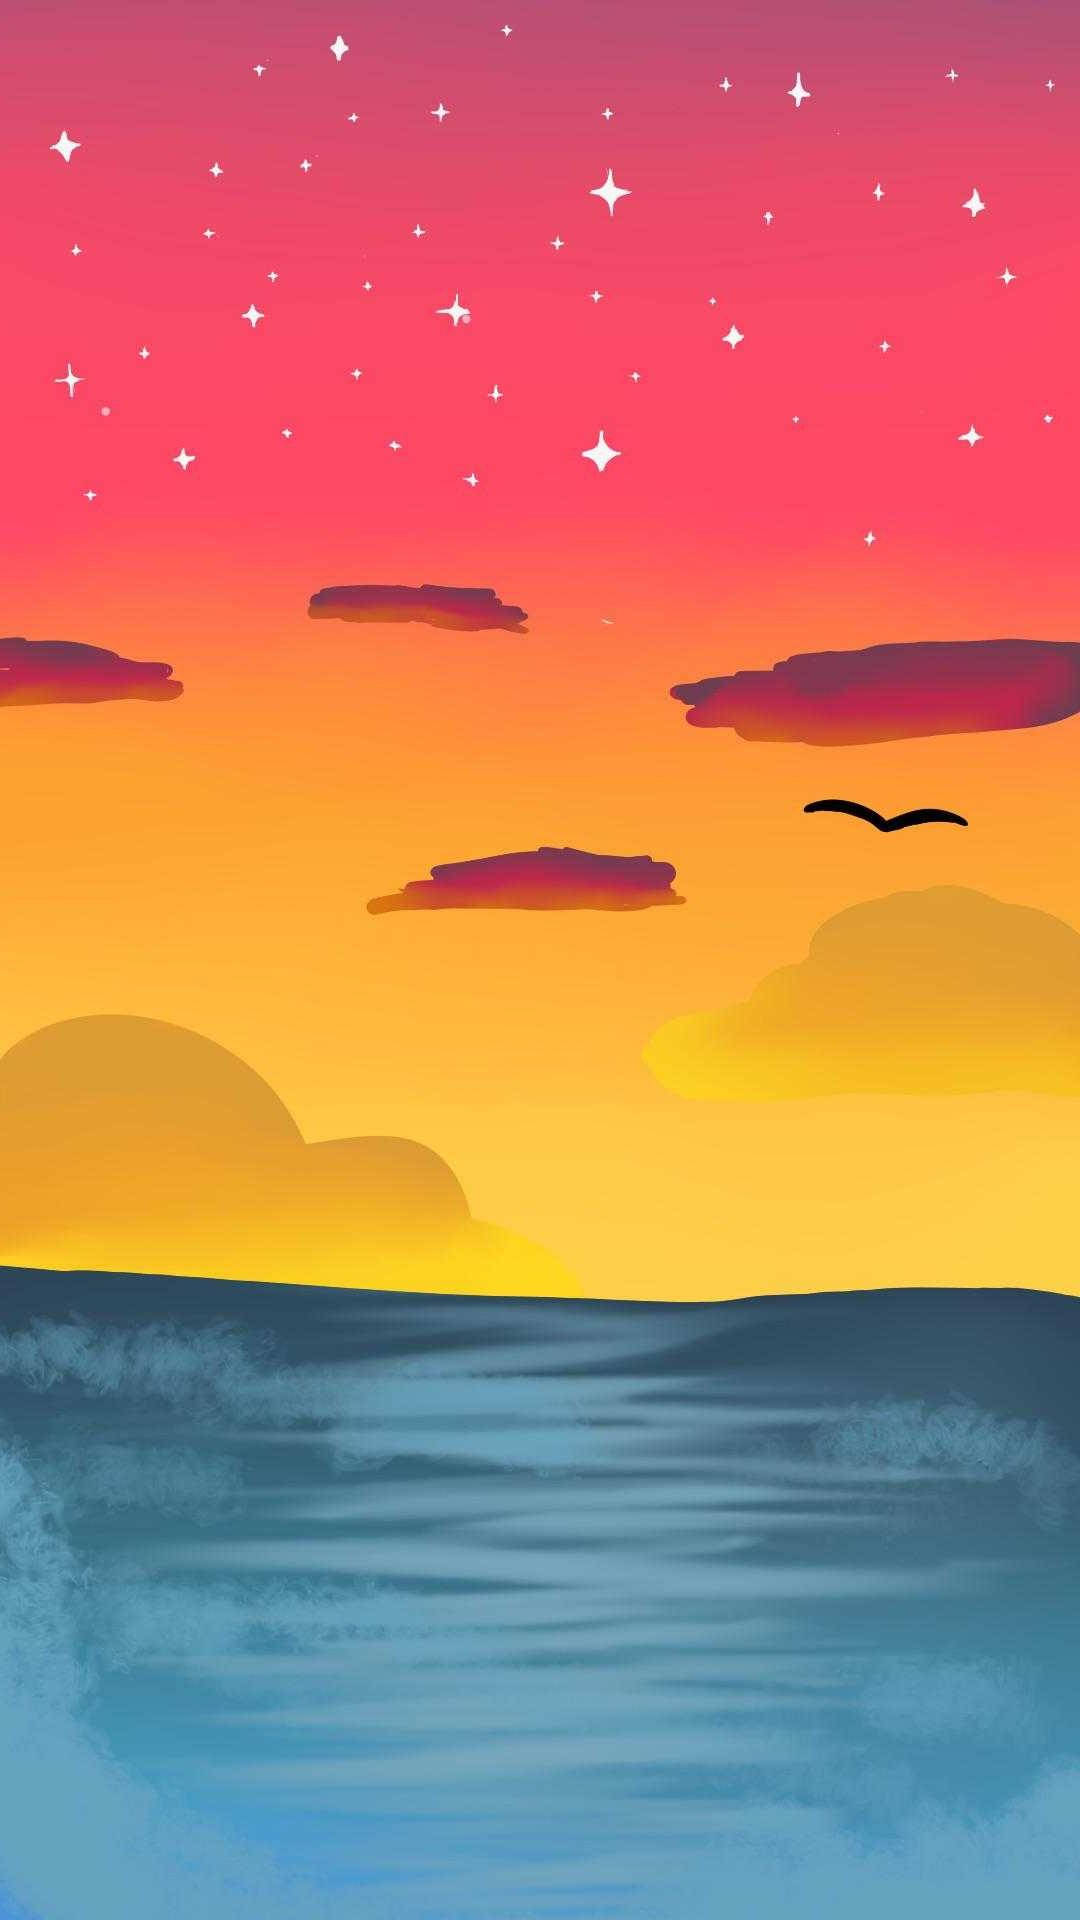 Pansexual Sea And Sky Wallpaper